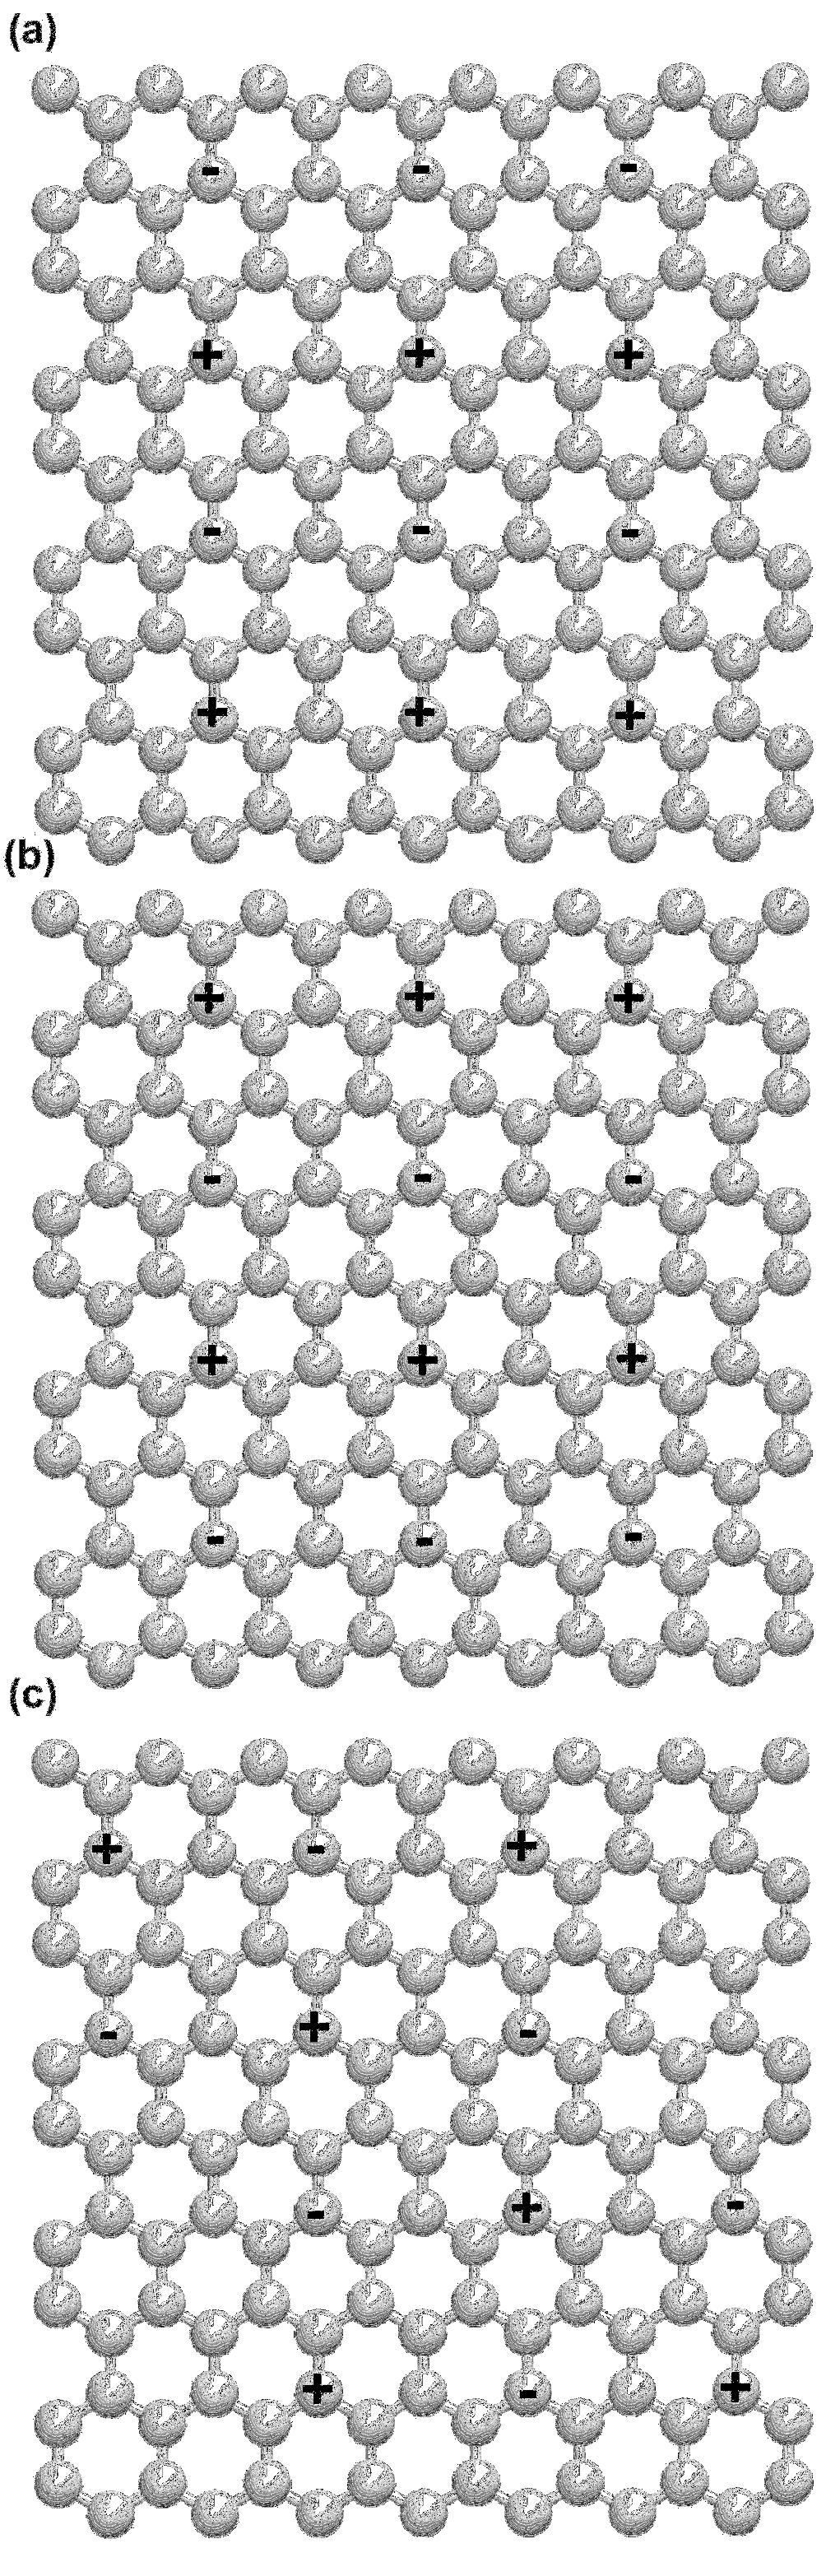 Figre 4.2: Graphene plates with 135 carbon atoms and dimensions 1.697 1.72 nm as in type A, B and C systems. Positive and negative 1.0e charges are marked with + and - respectively.